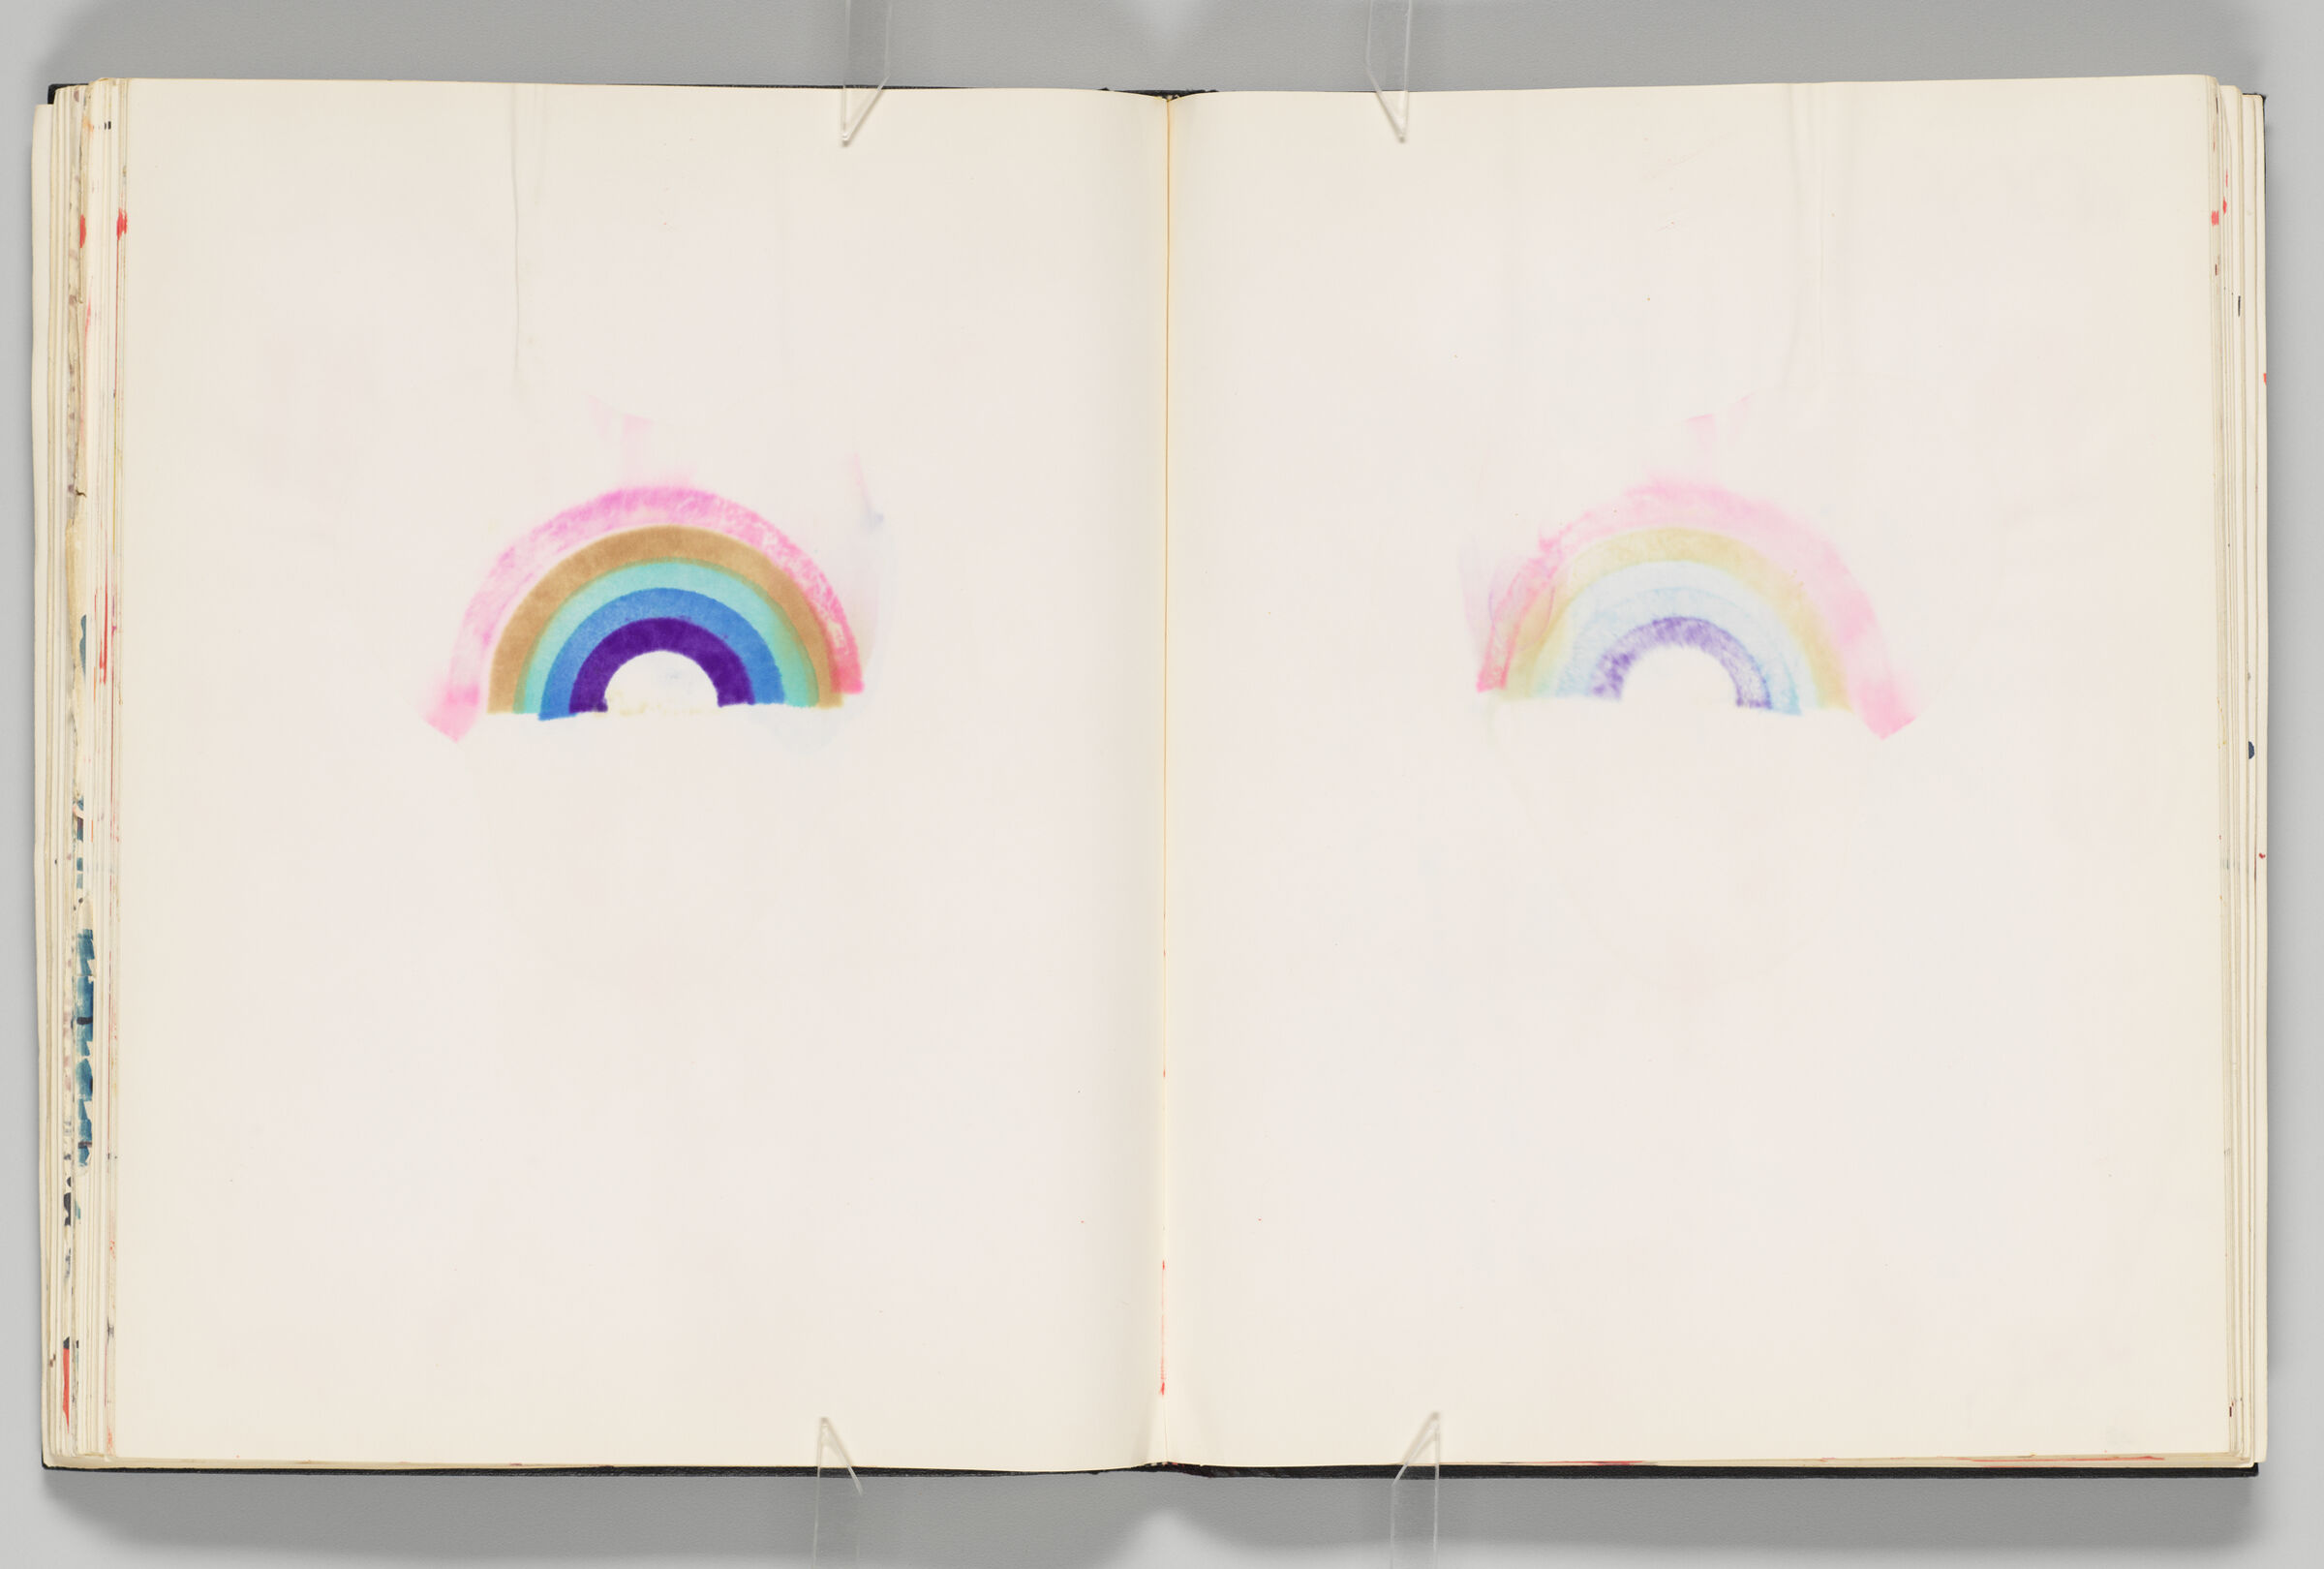 Untitled (Bleed-Through Of Previous Page, Left Page); Untitled (Color Transfer Of Rainbow Stamp Impression Manipulated With Water, Right Page)